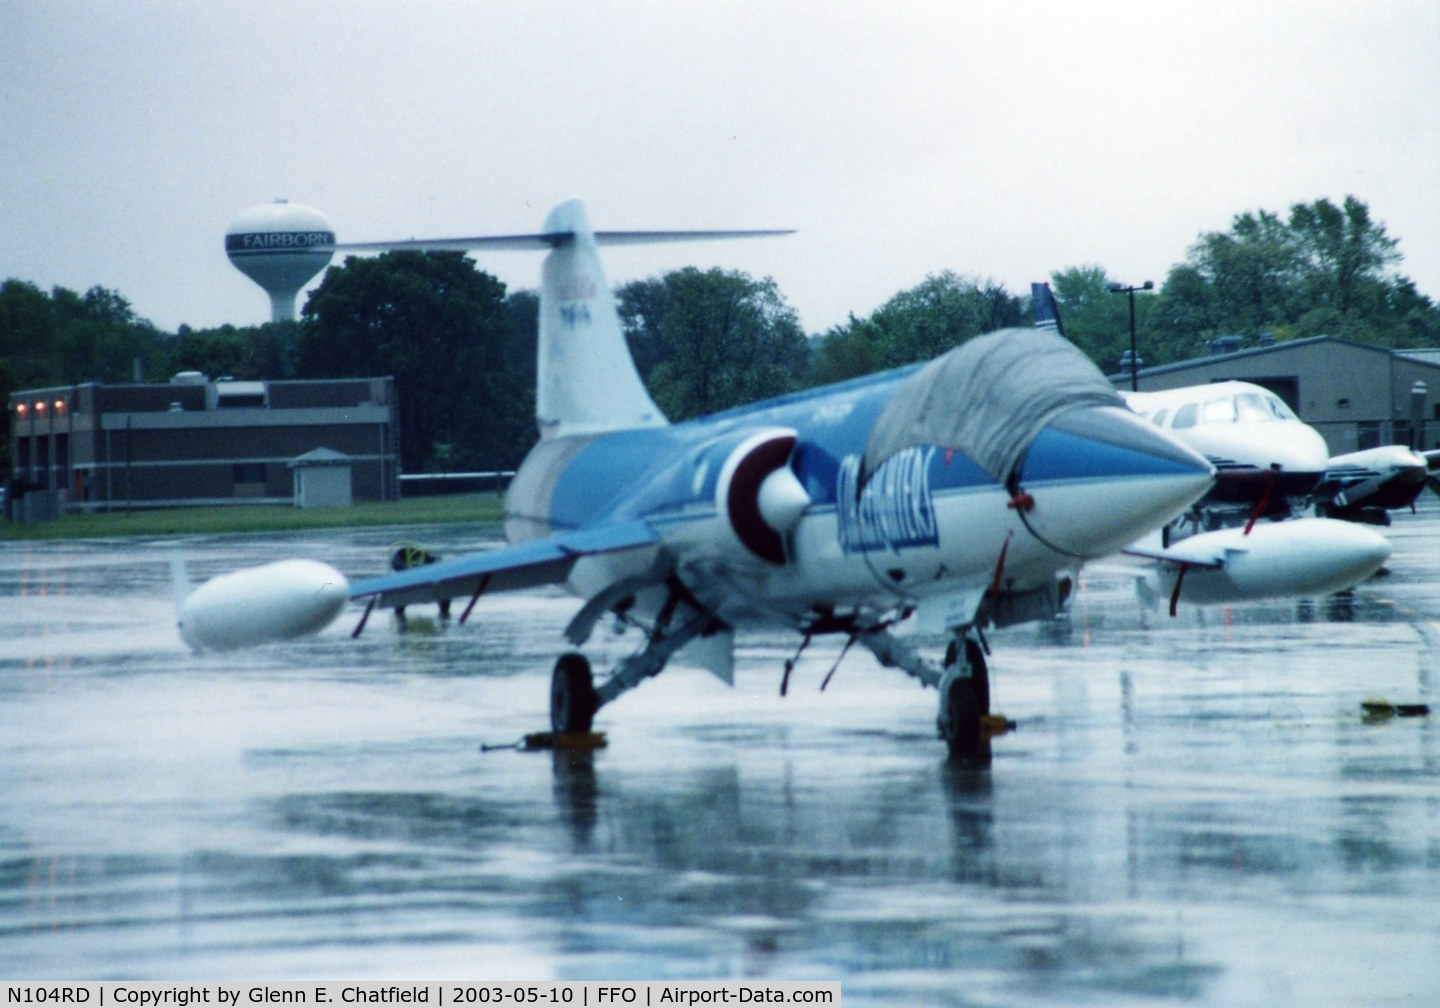 N104RD, 1963 Lockheed CF-104G C/N 104850, At the 100th Anniversary of Flight celebration, heavy down-pour cancelled the show